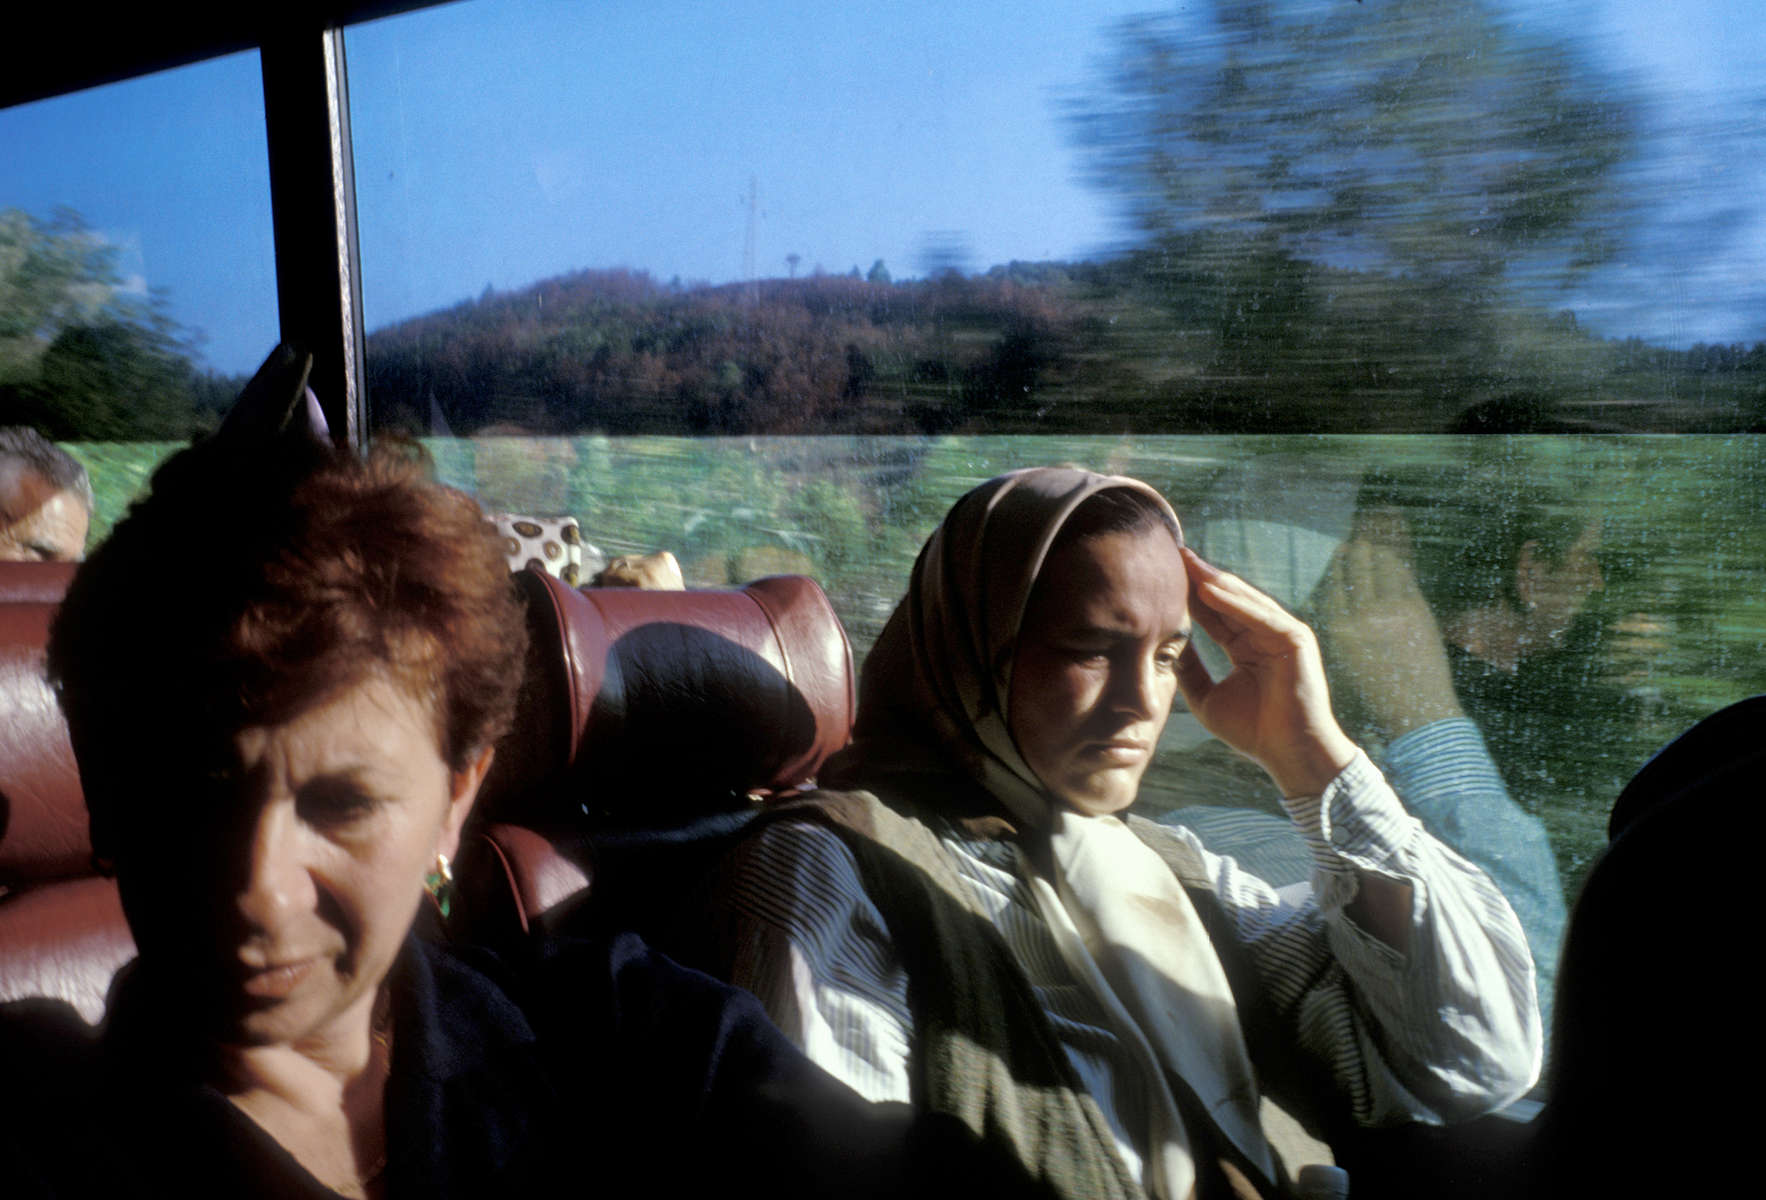 Srebrenica widows head back to Sarajevo after a day spent in Srebrenica, where they had gone to see the homes they were forced to leave in 1995, when Serb forces overran their town and massacred 7,000 to 8,000 men and boys. Most of the widows\' homes were occupied by Serb refugees after the end of the war, and the women were beginning the legal process of reclaiming their property -- and deciding whether they wanted to return to their homes. October 2000.